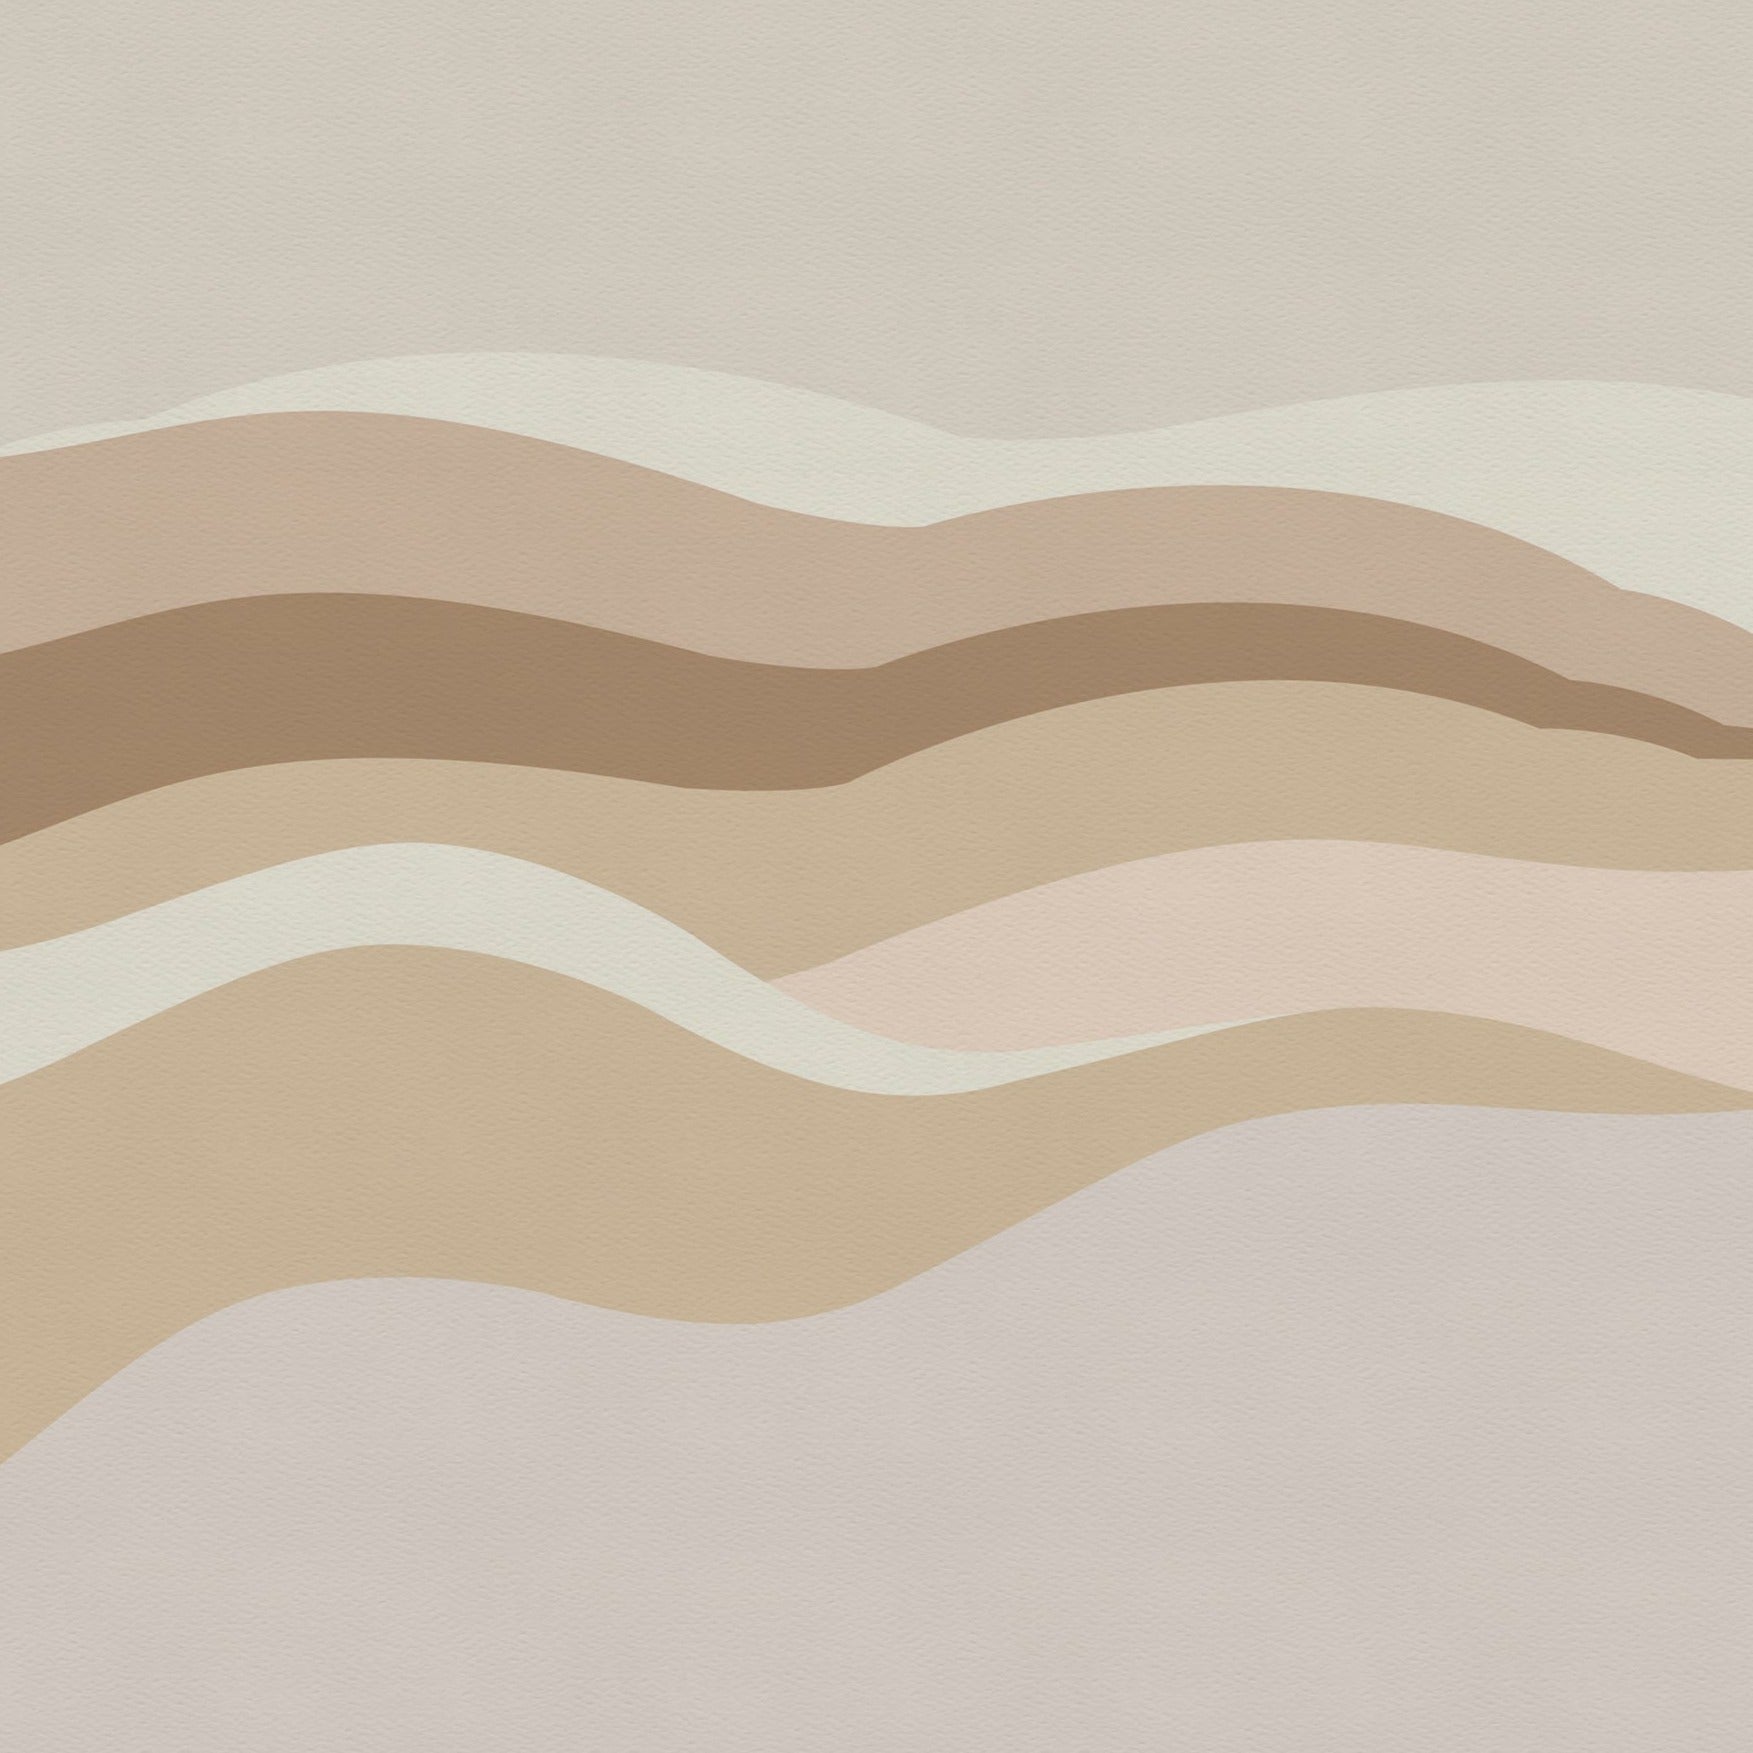 Close-up view of the Modern Landscape Wall Mural Wallpaper showcasing abstract wavy lines in shades of beige, brown, and cream, forming a visually soothing pattern.